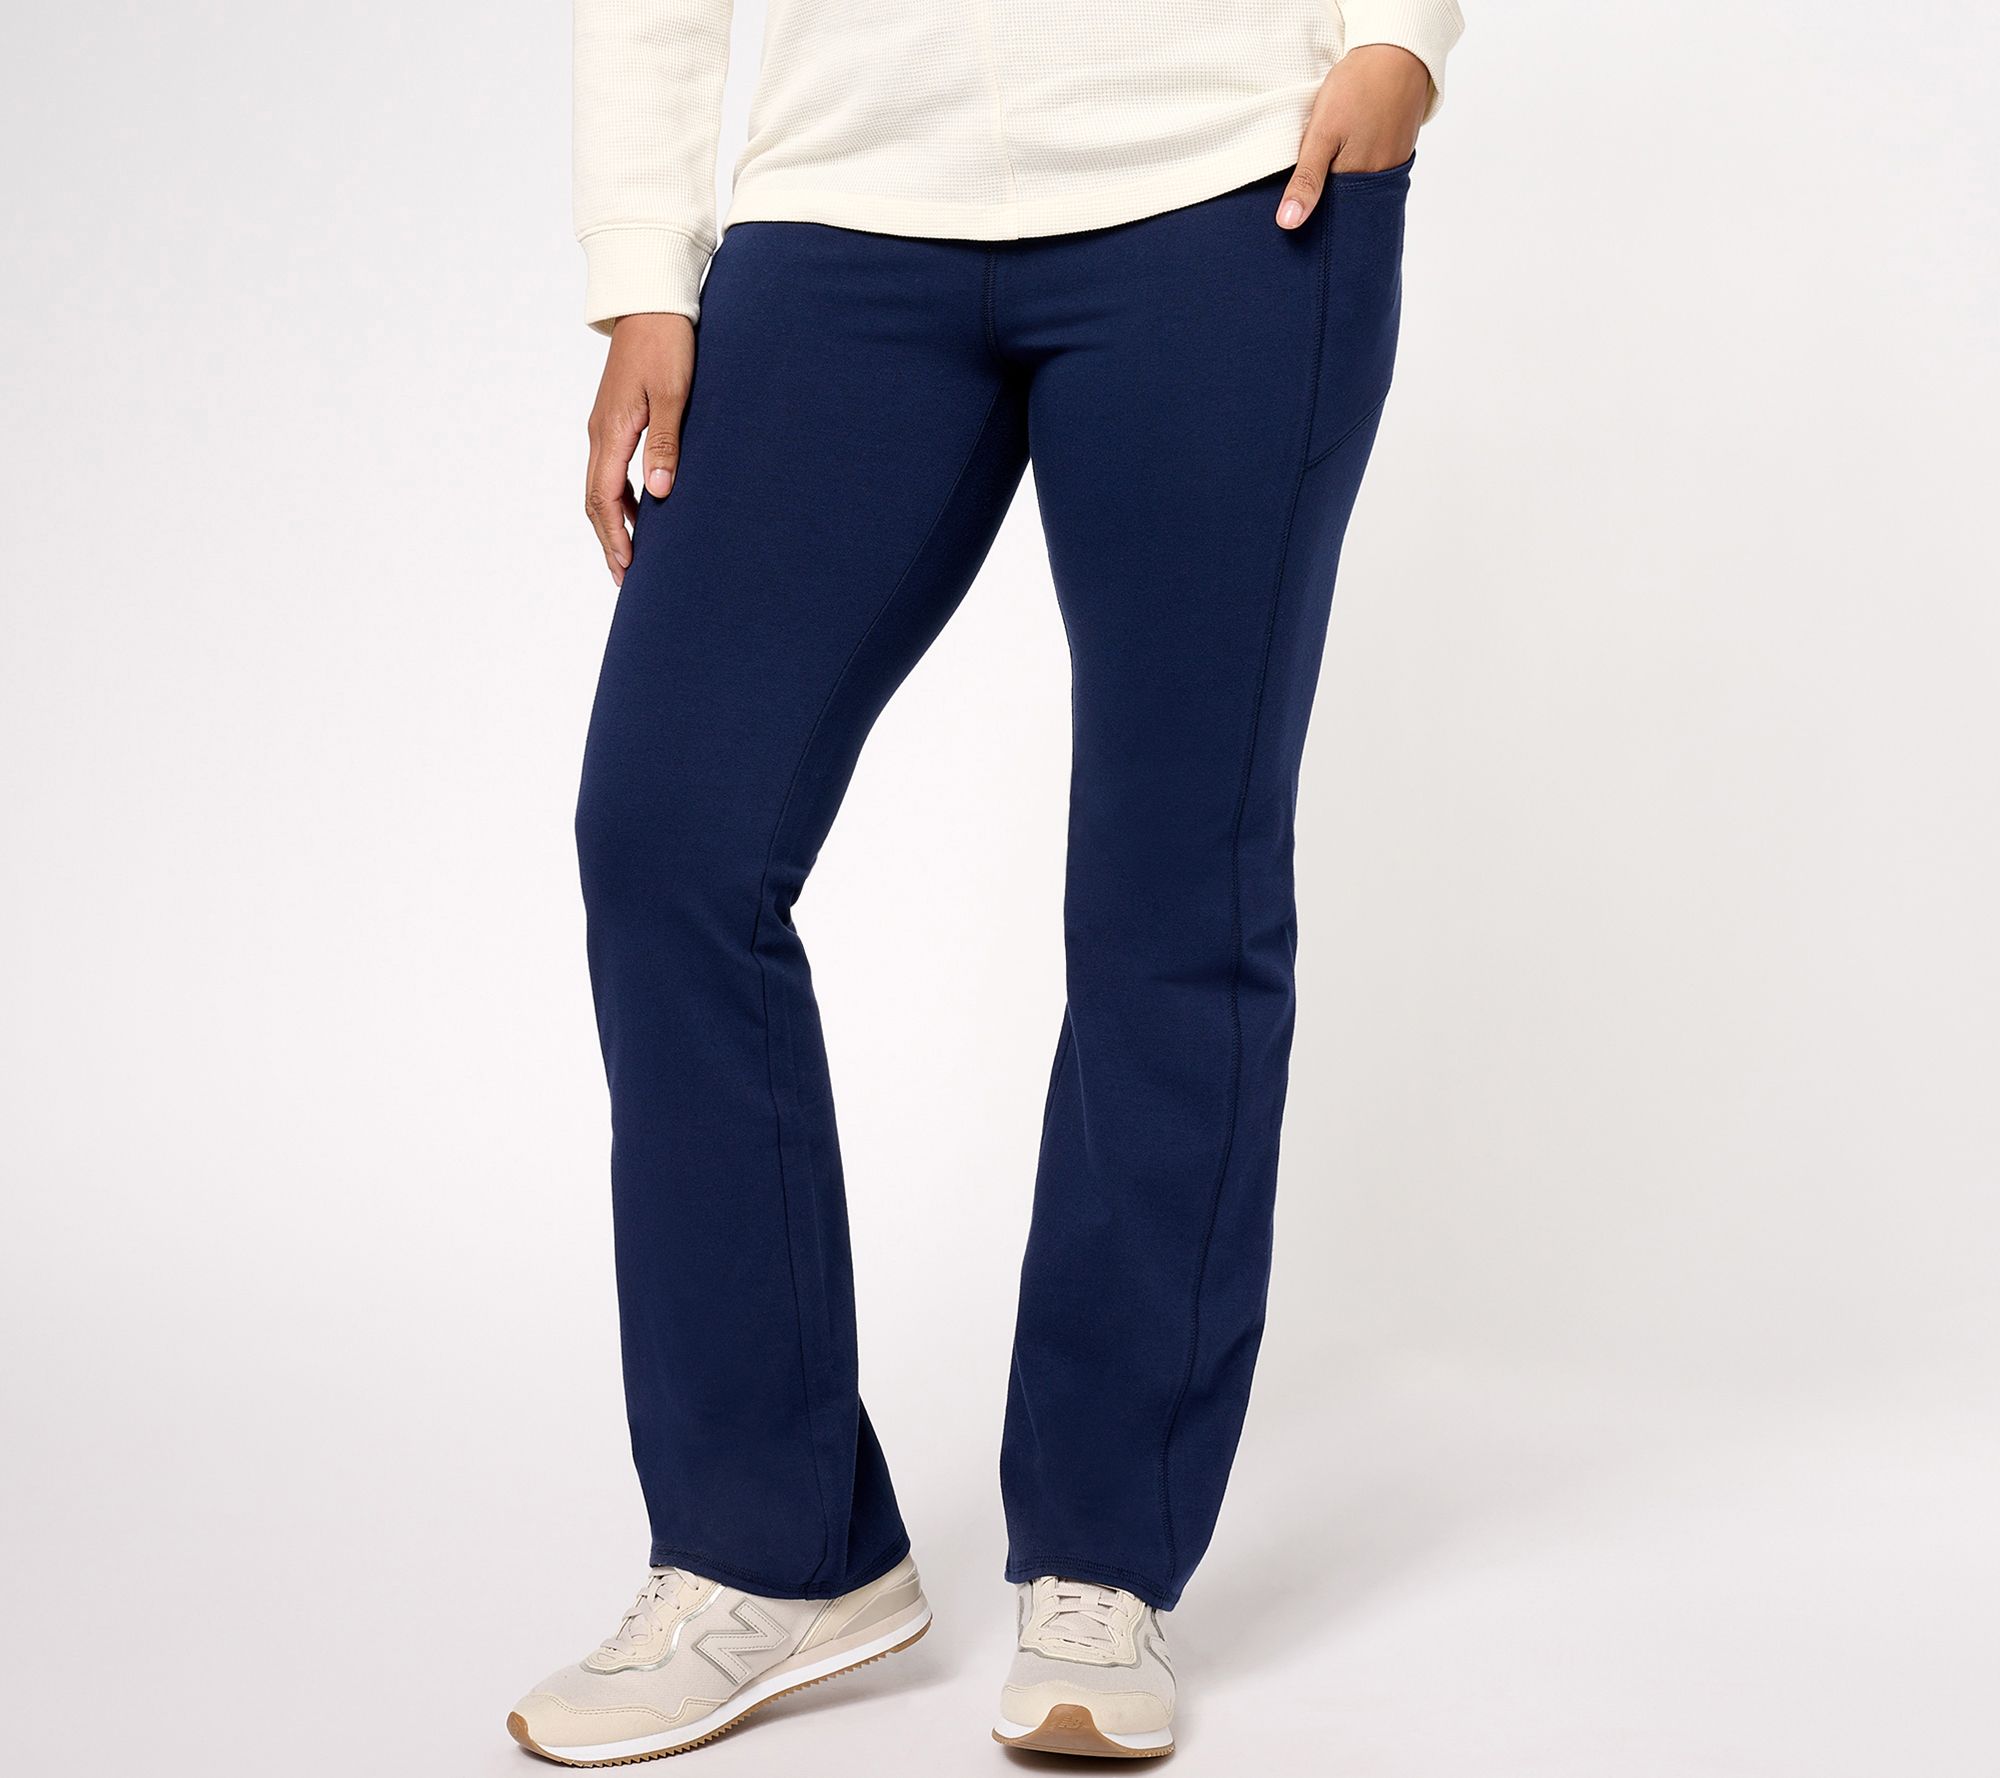 Denim & Co. Active Duo Stretch Regular Lightly Boot Pant w/ Pockets ...